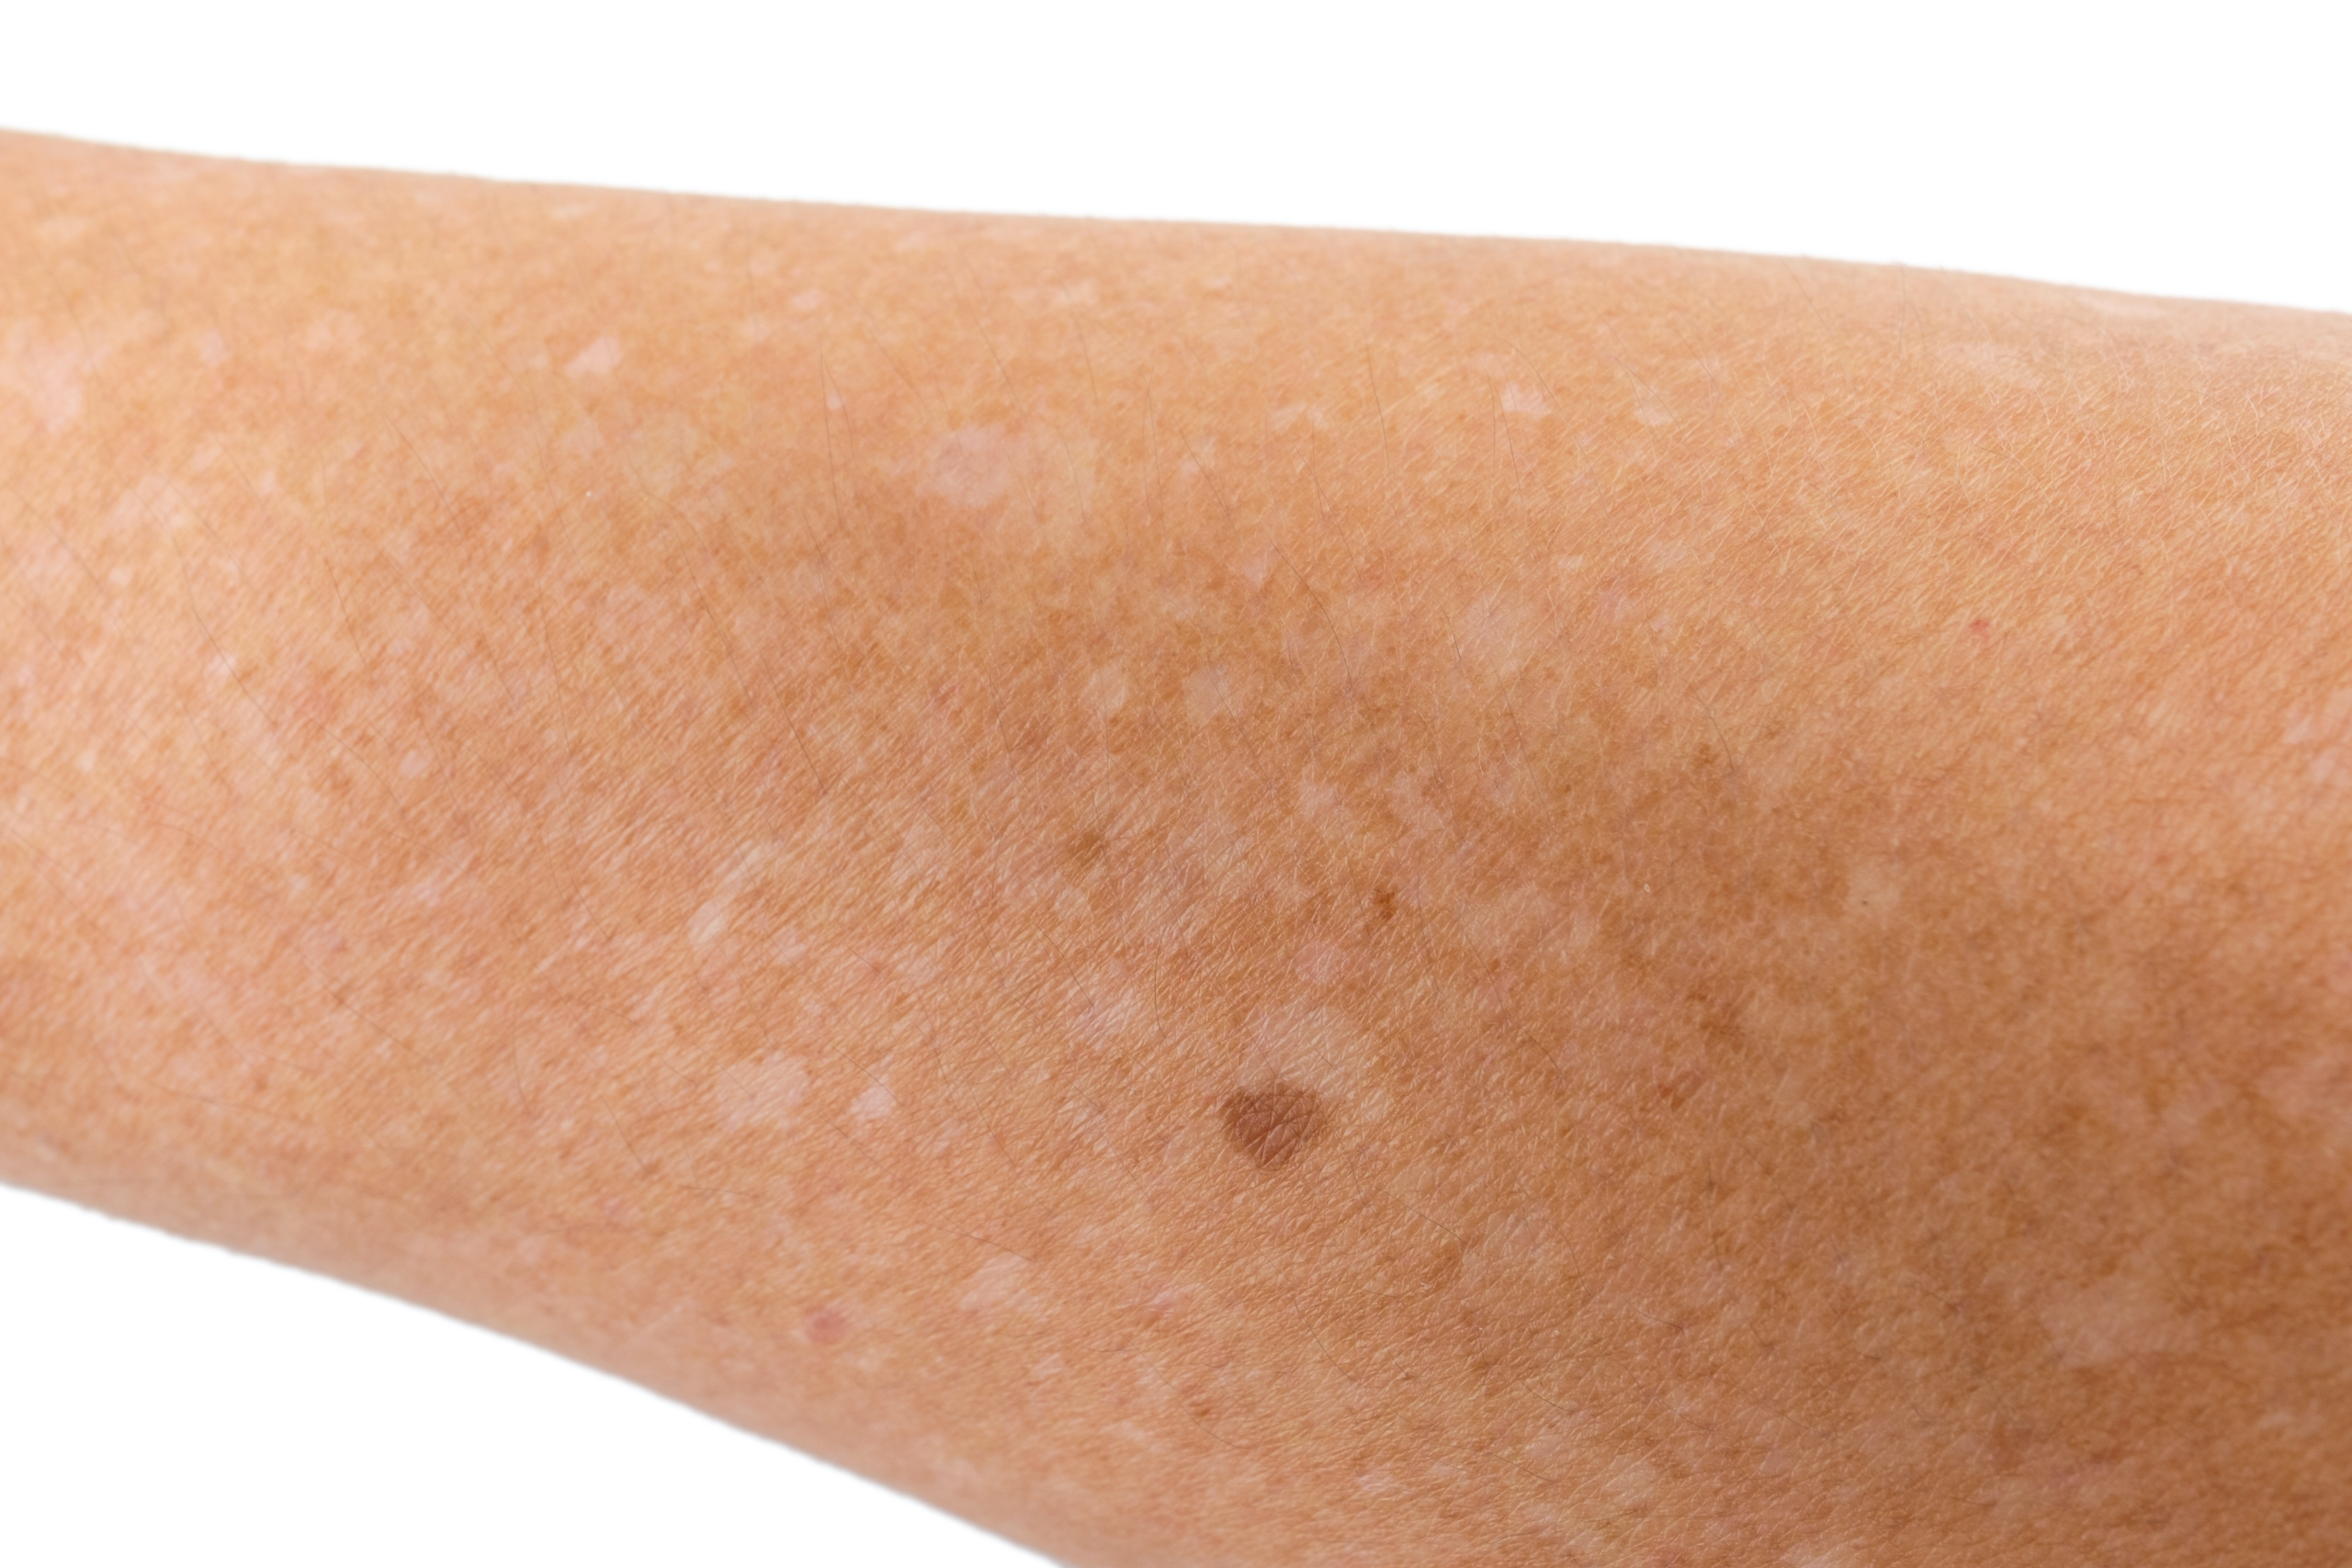 Which Vitamin Deficiency Causes White Spots on Skin? - The Derm |  Dermatologists in Cook County, IL